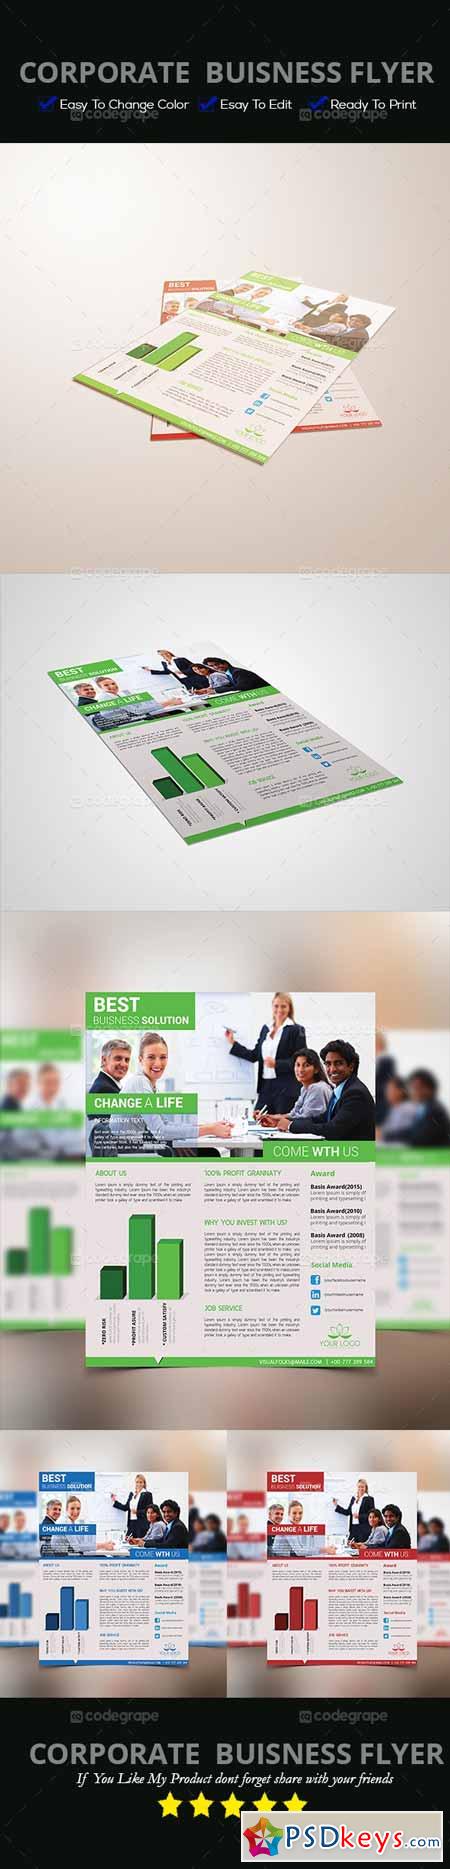 Corporate Business Flyer 5403